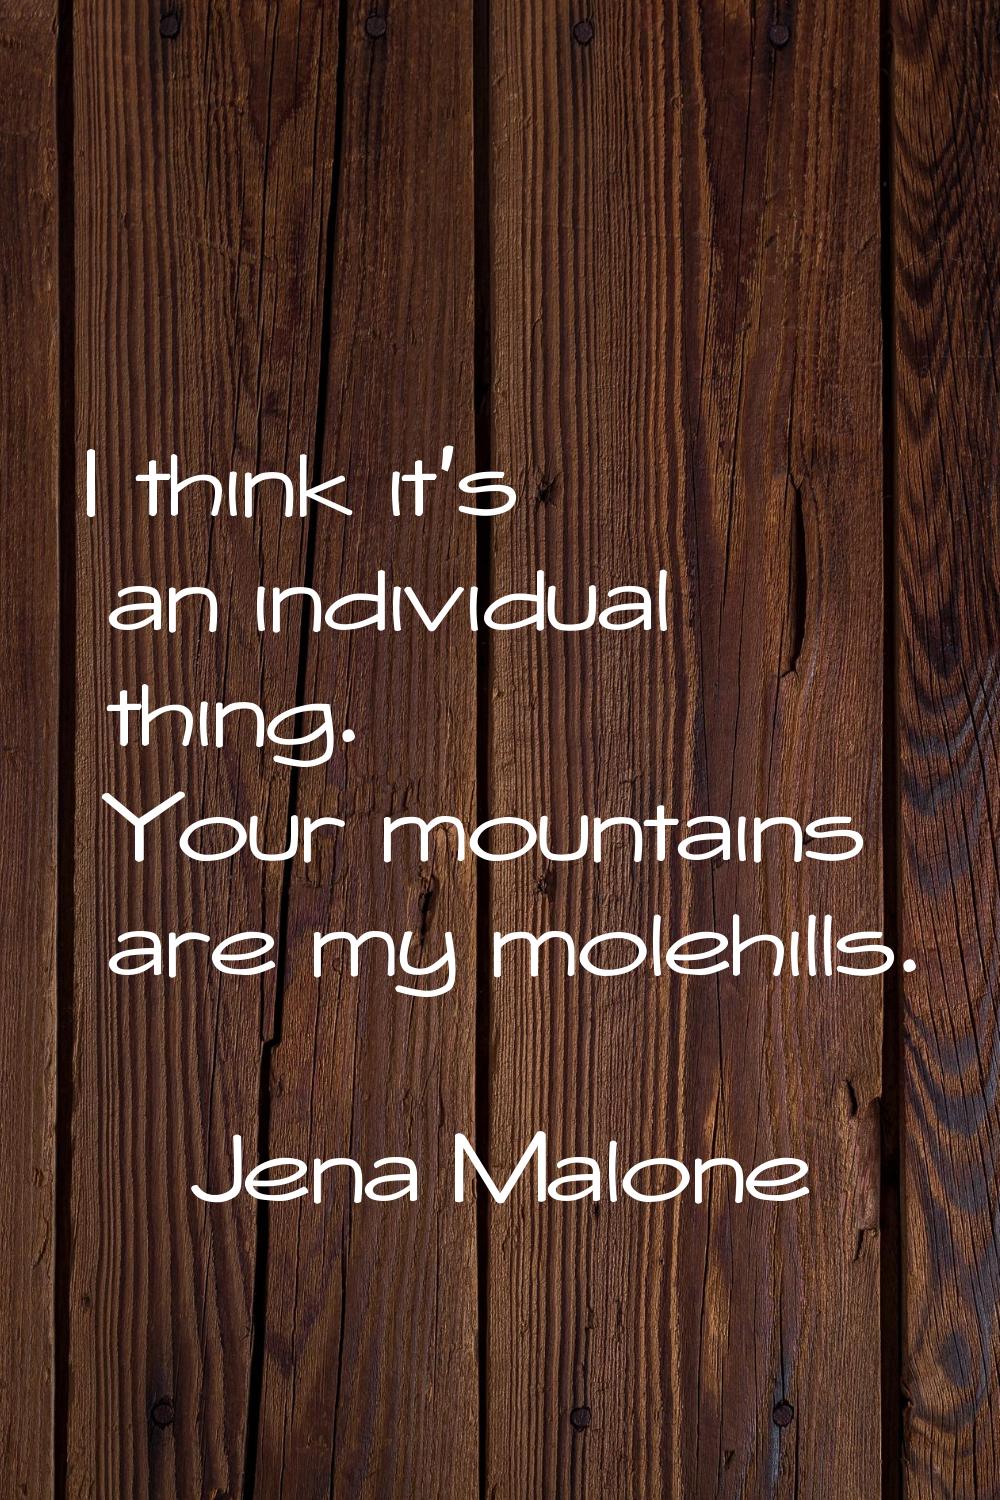 I think it's an individual thing. Your mountains are my molehills.